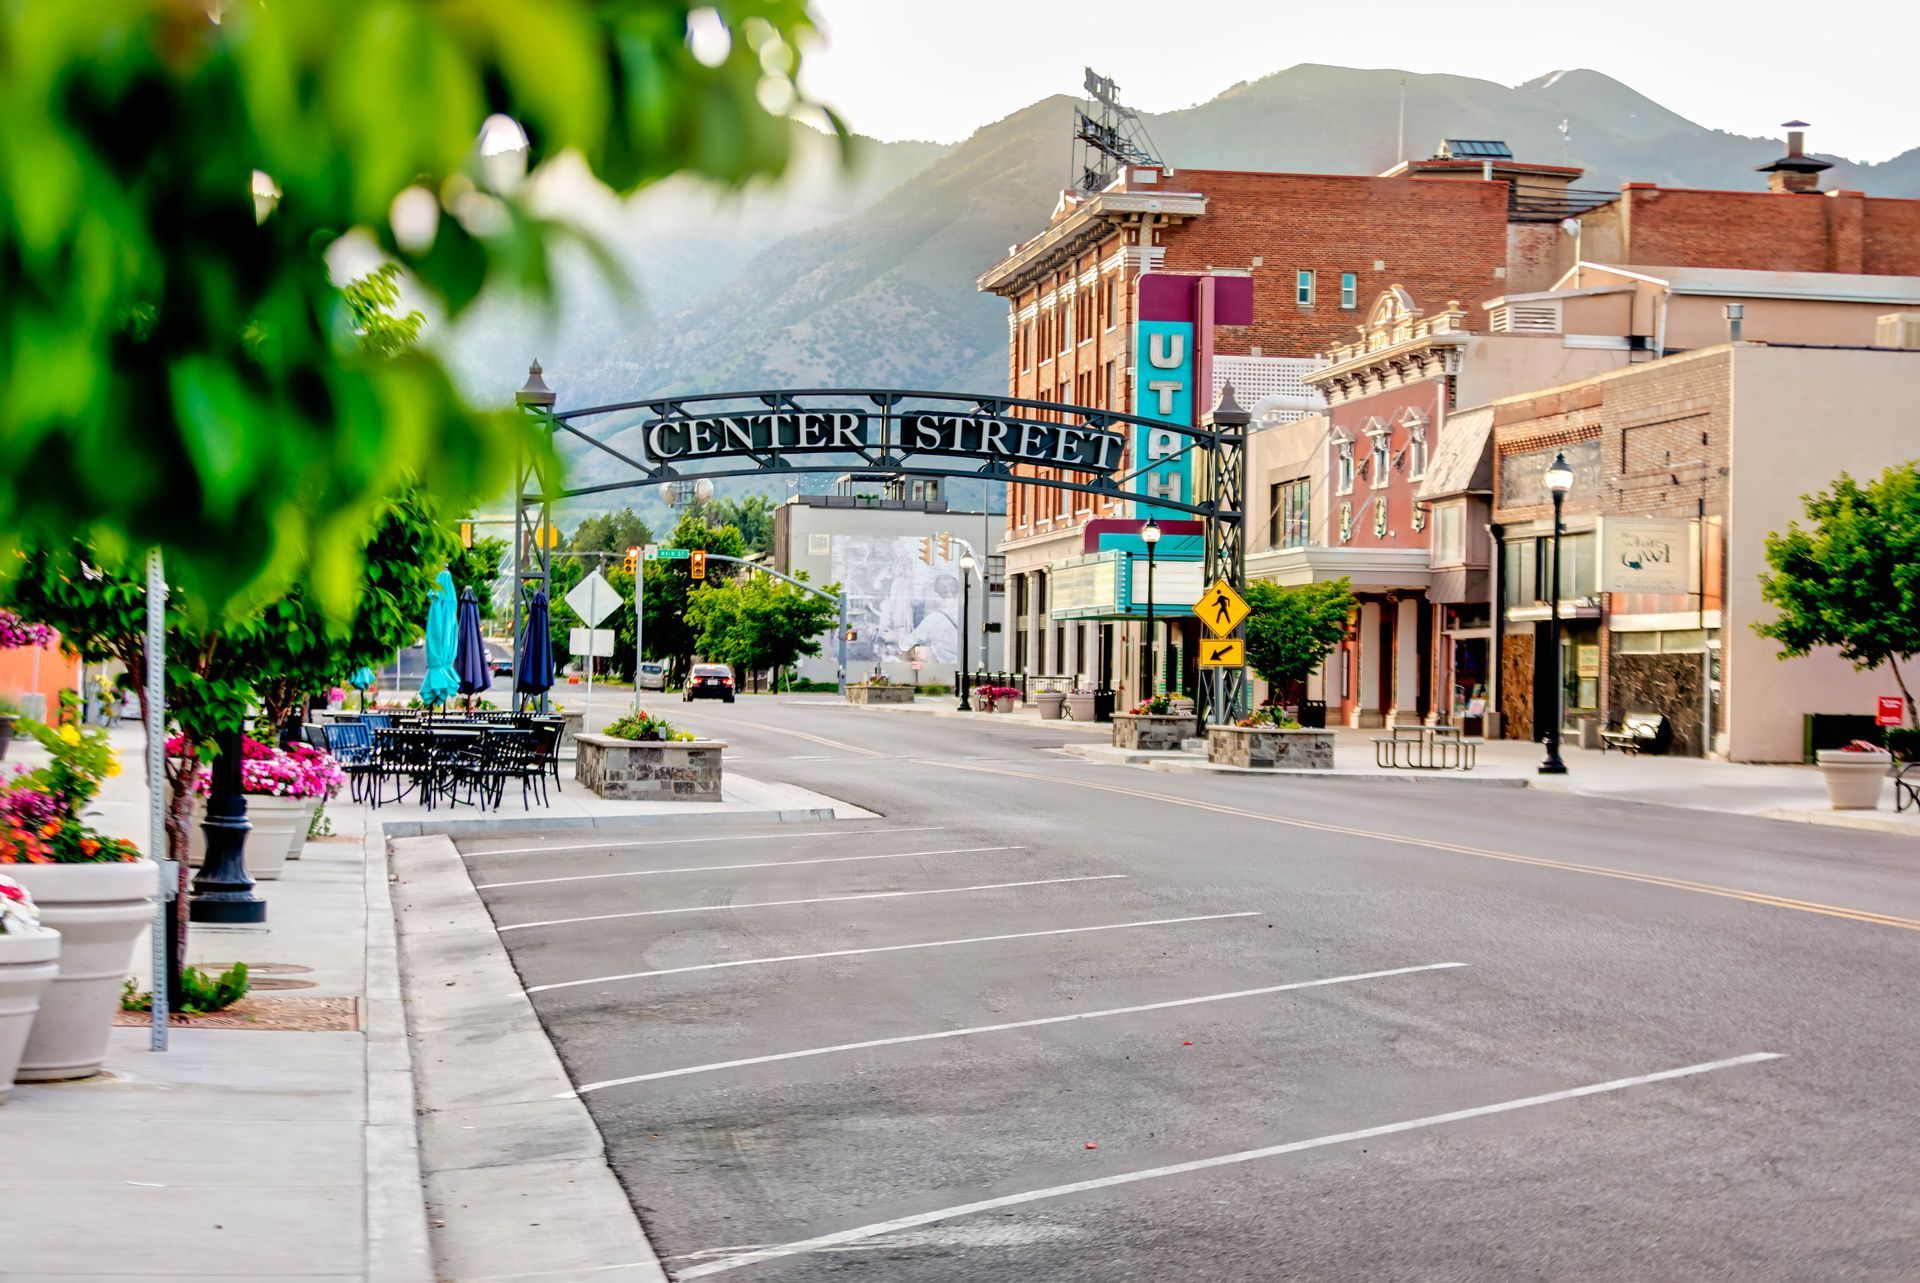 Center Street in Logan, Utah in the early morning so there are no cars or people.